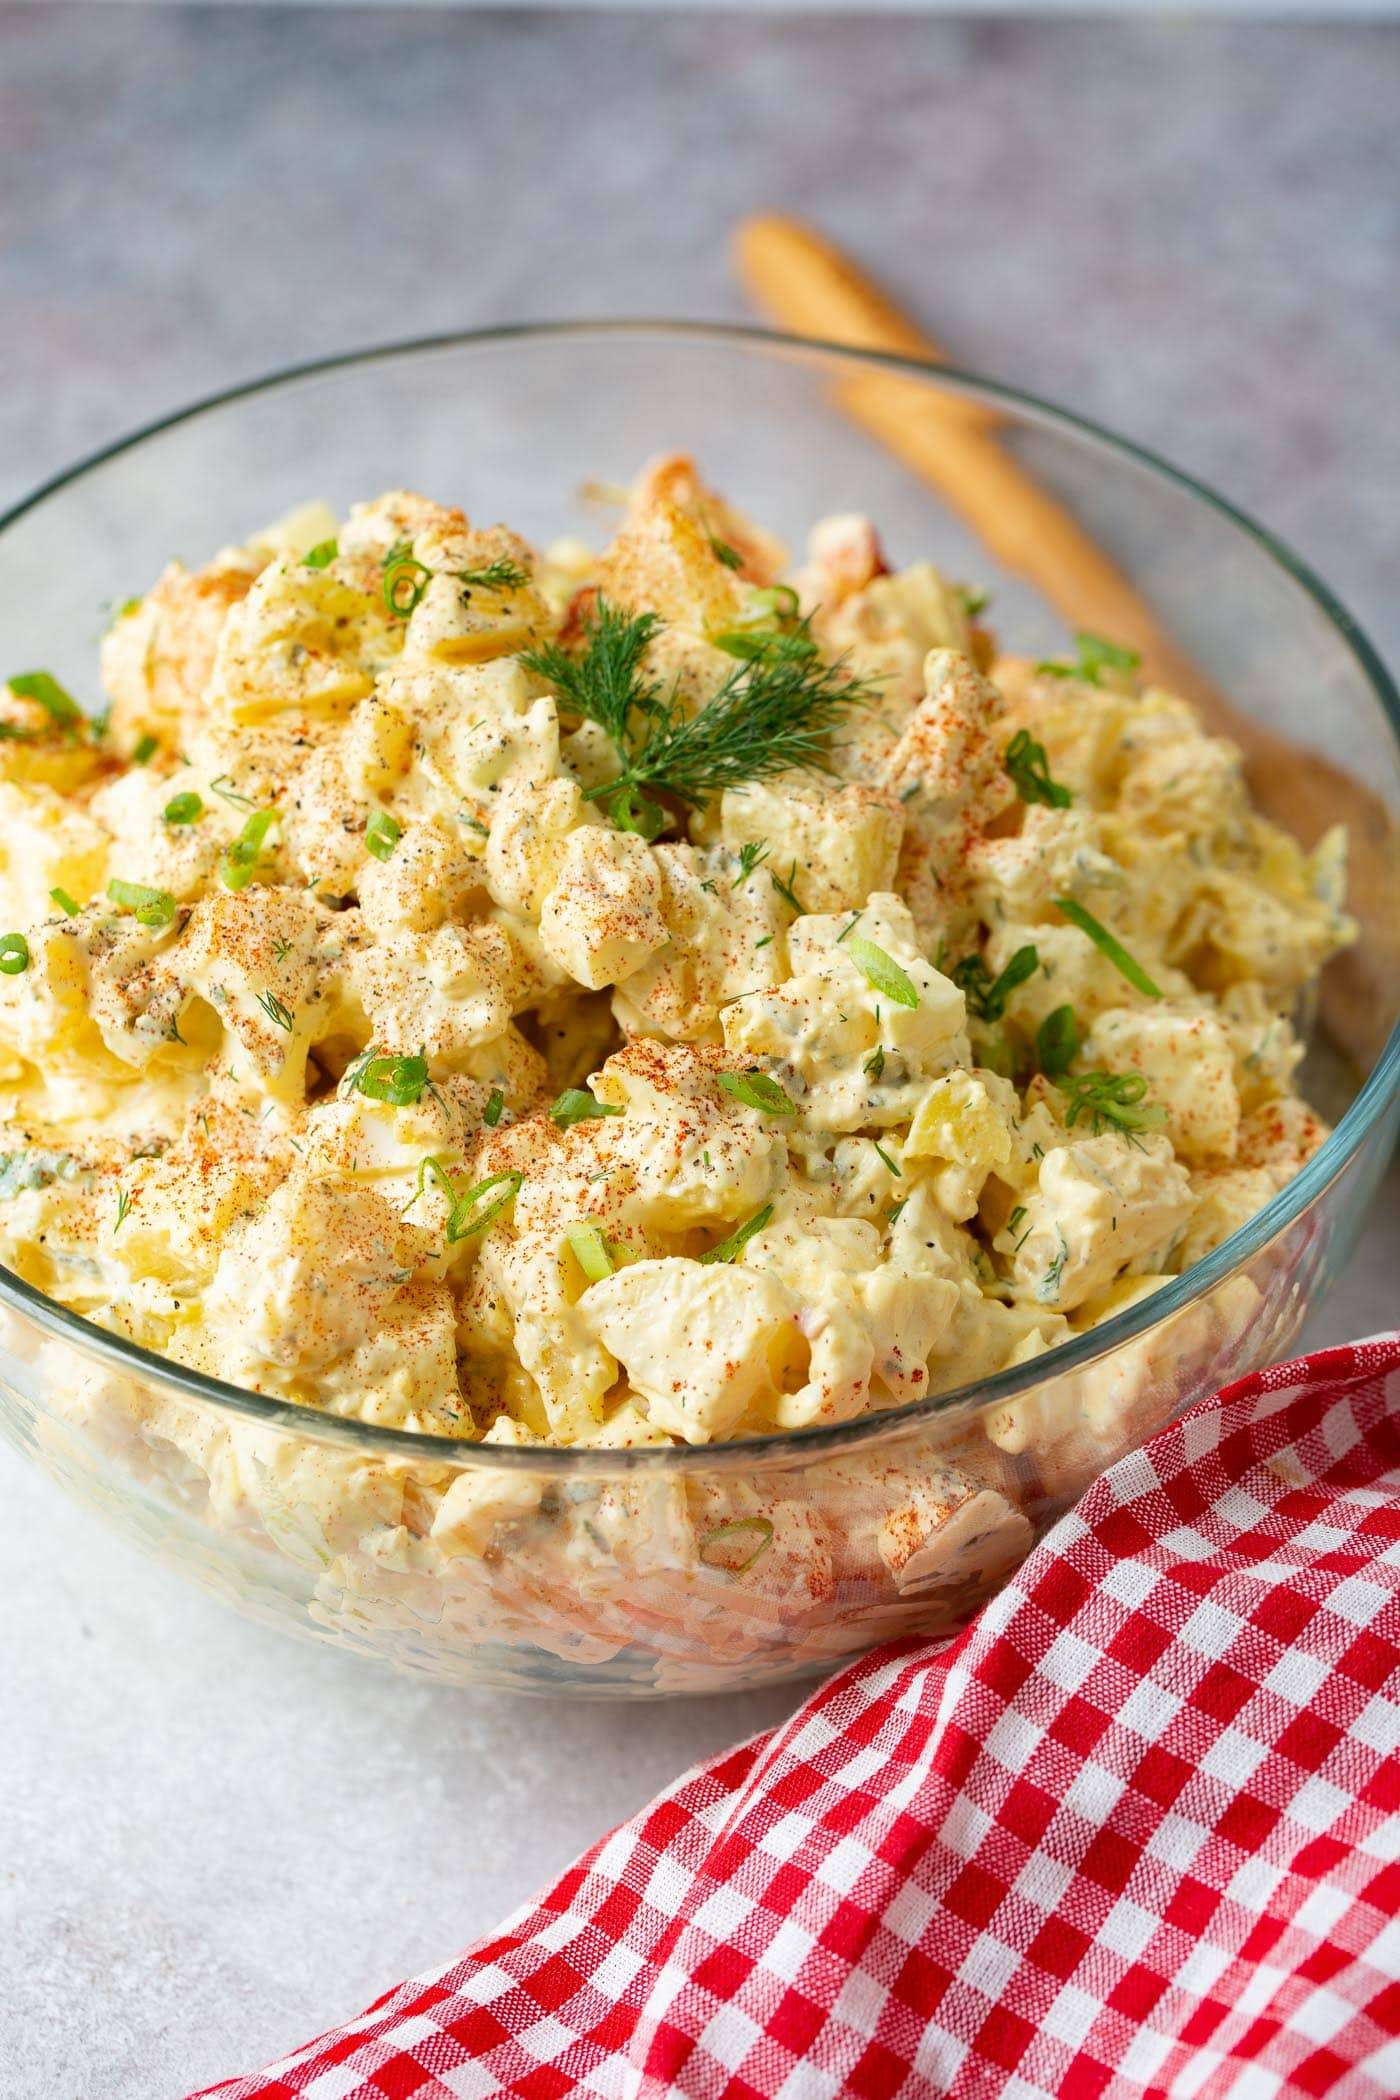 How to Make The Best Potato Salad Ever [+Video]